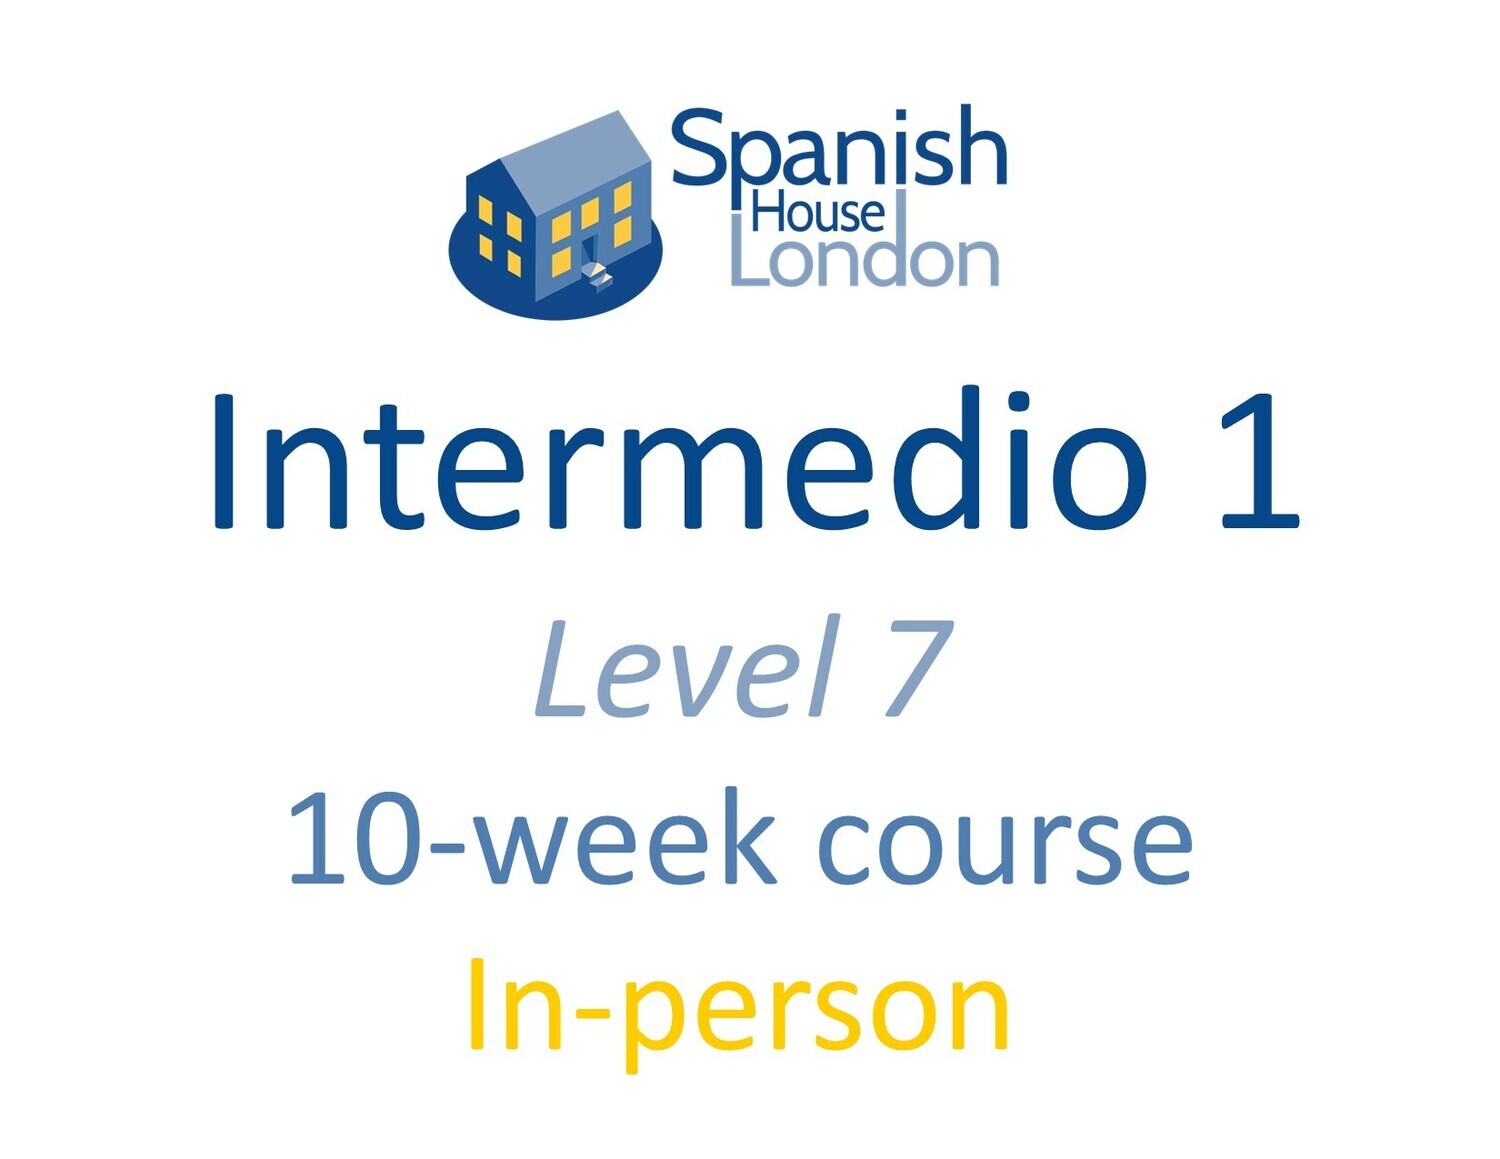 Intermedio 1 Course starting on 31st August at 9am in Clapham North